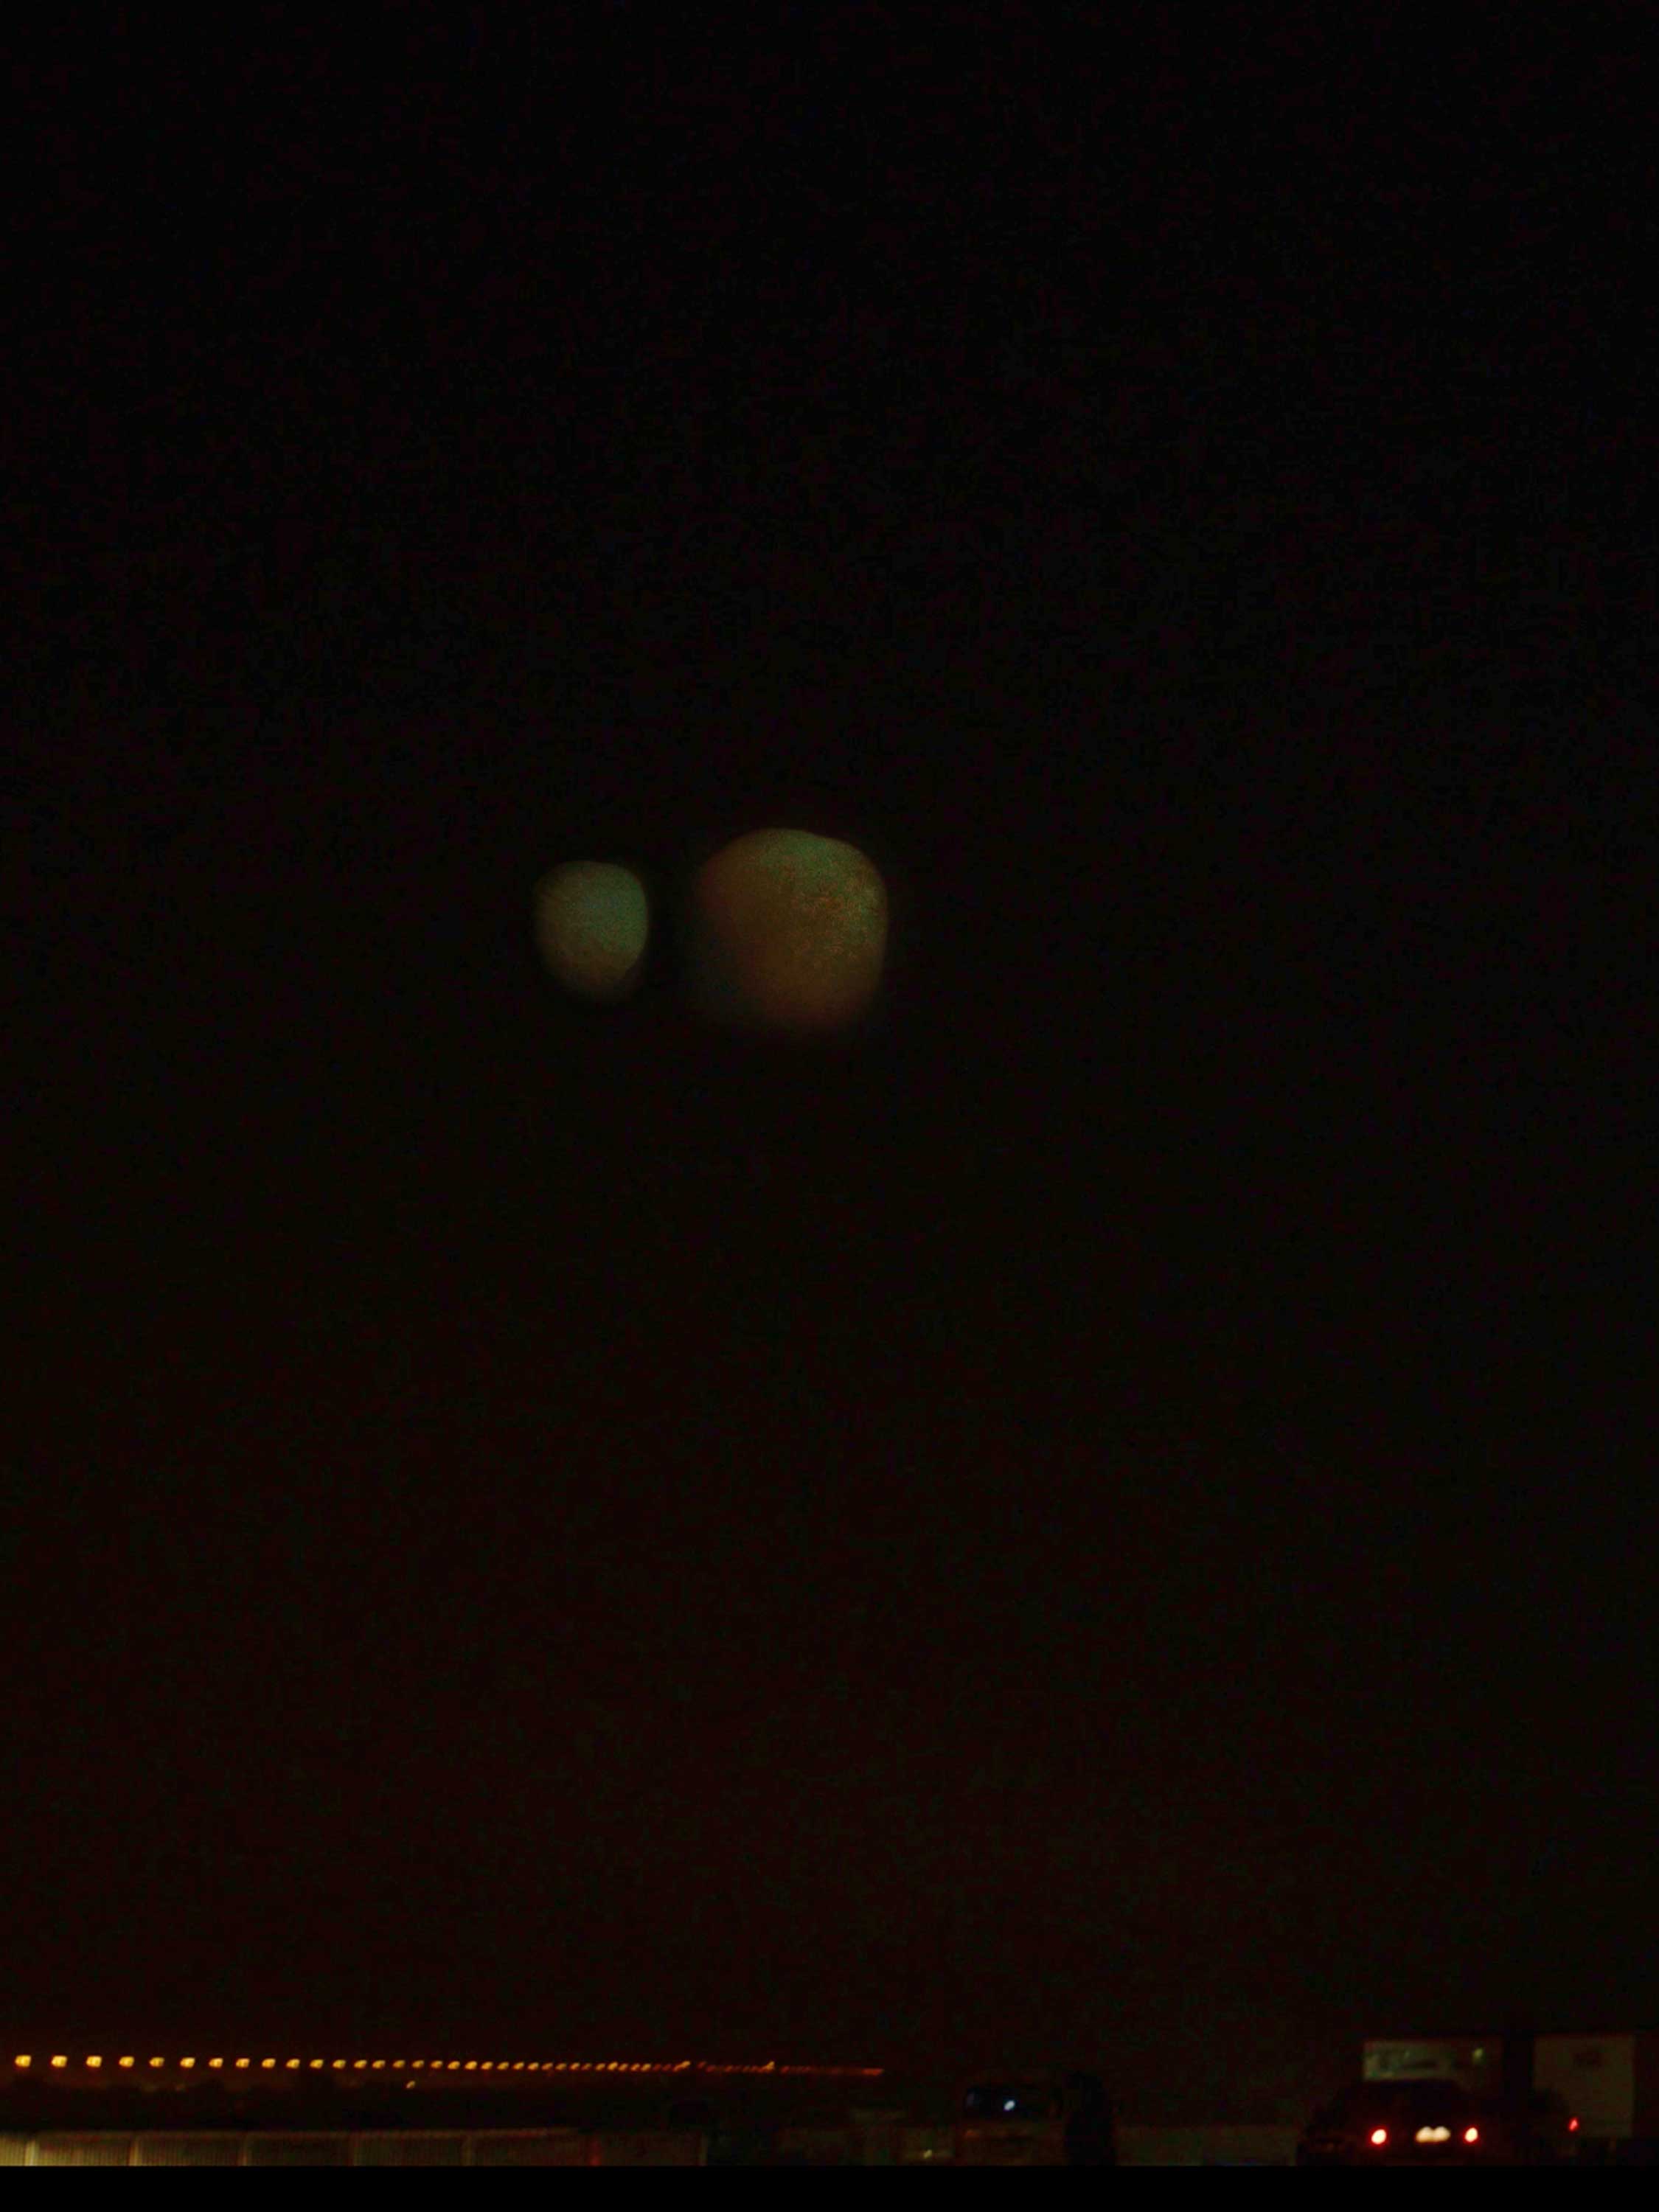 Twin planets appeared in the night sky over Dubai